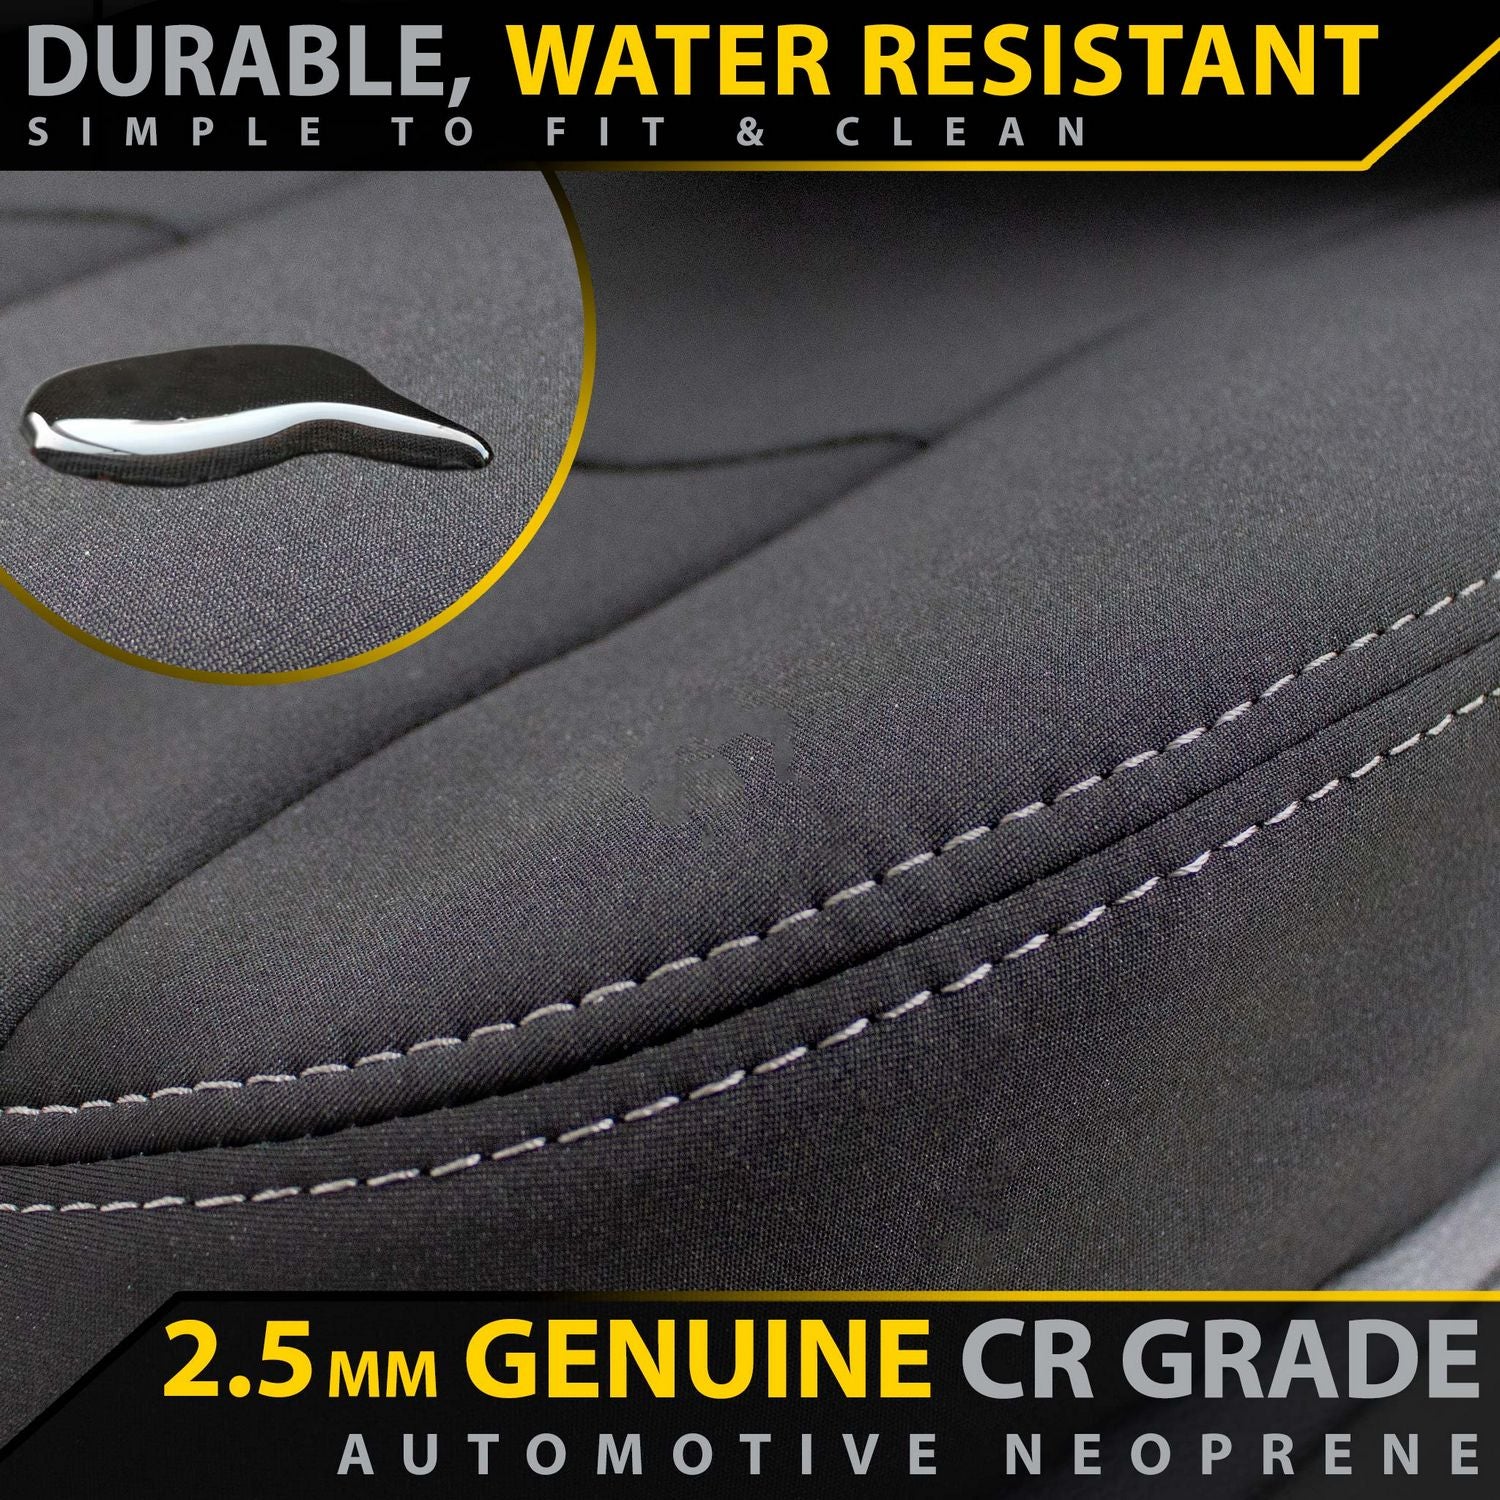 Toyota HiLux 8th Gen Workmate Neoprene Console Lid (In Stock)